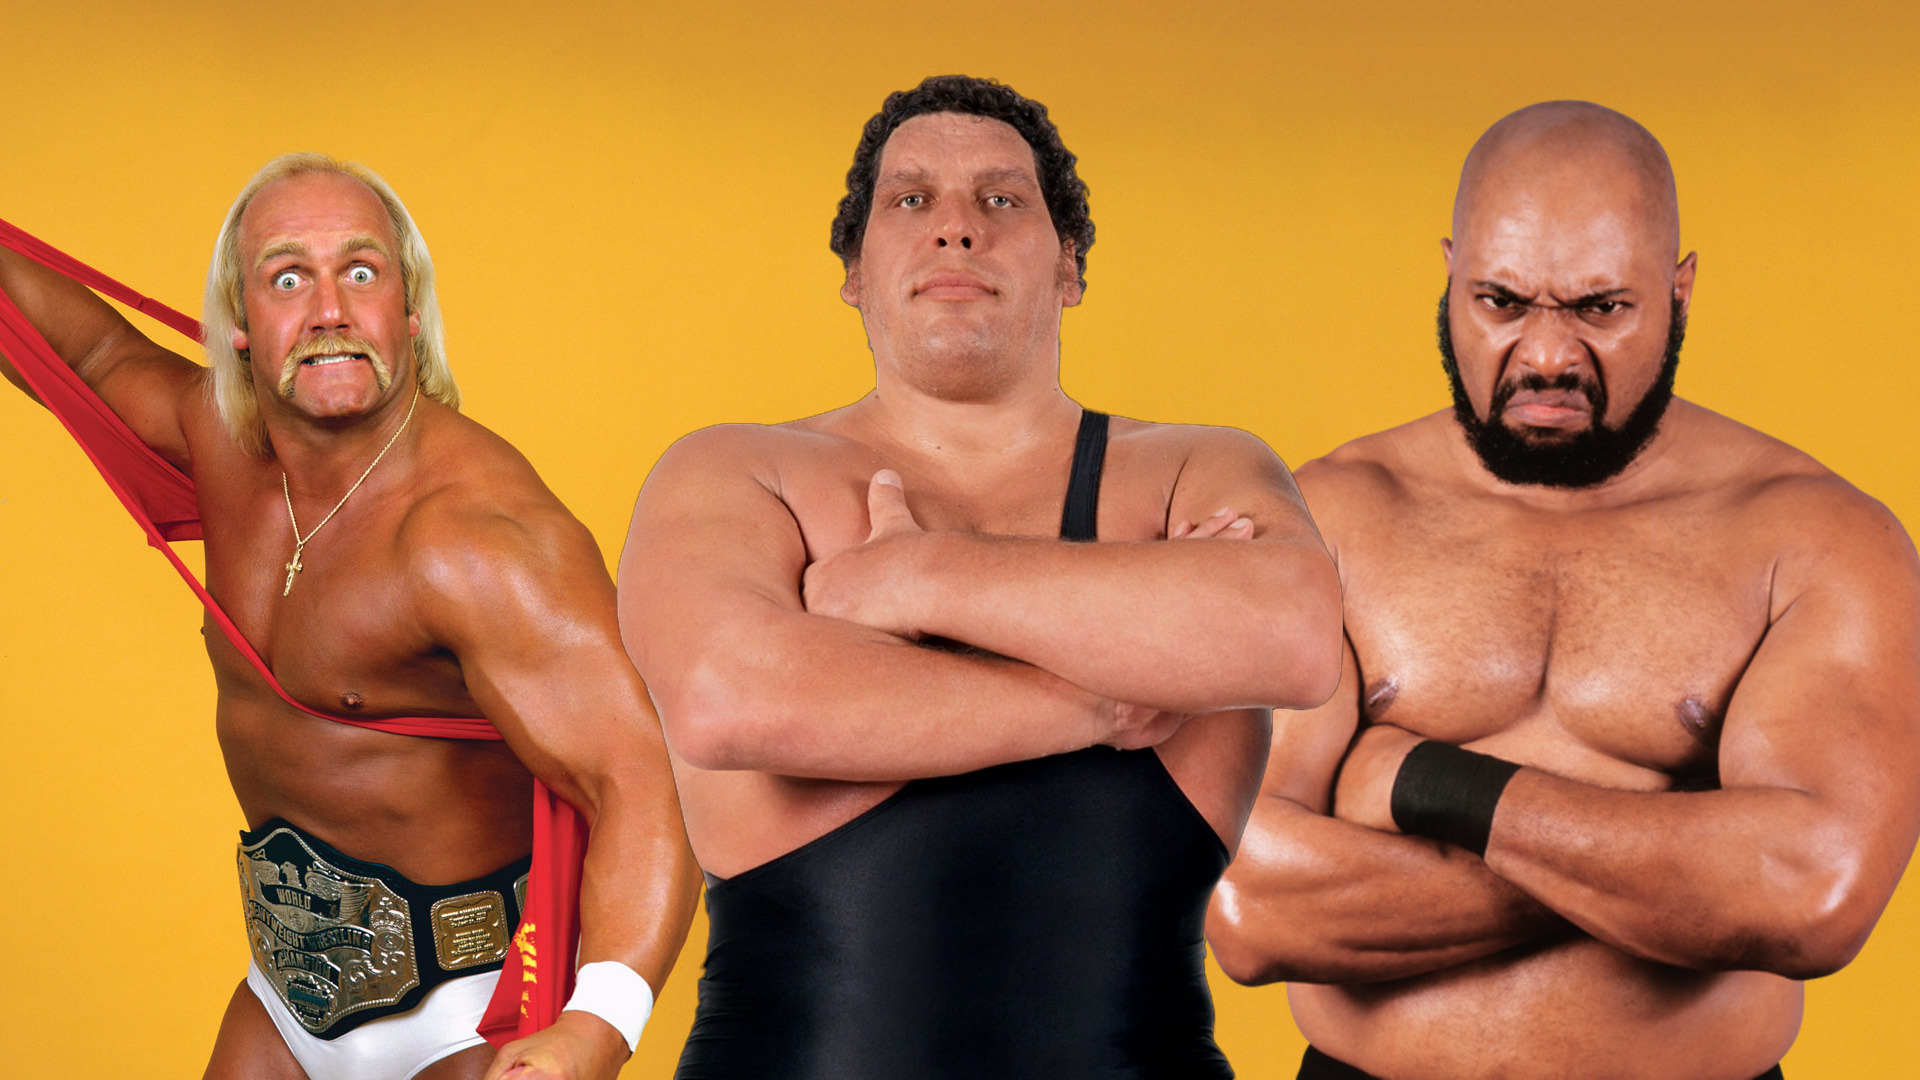 Hulk Hogan Andre The Giant and Bad News Brown